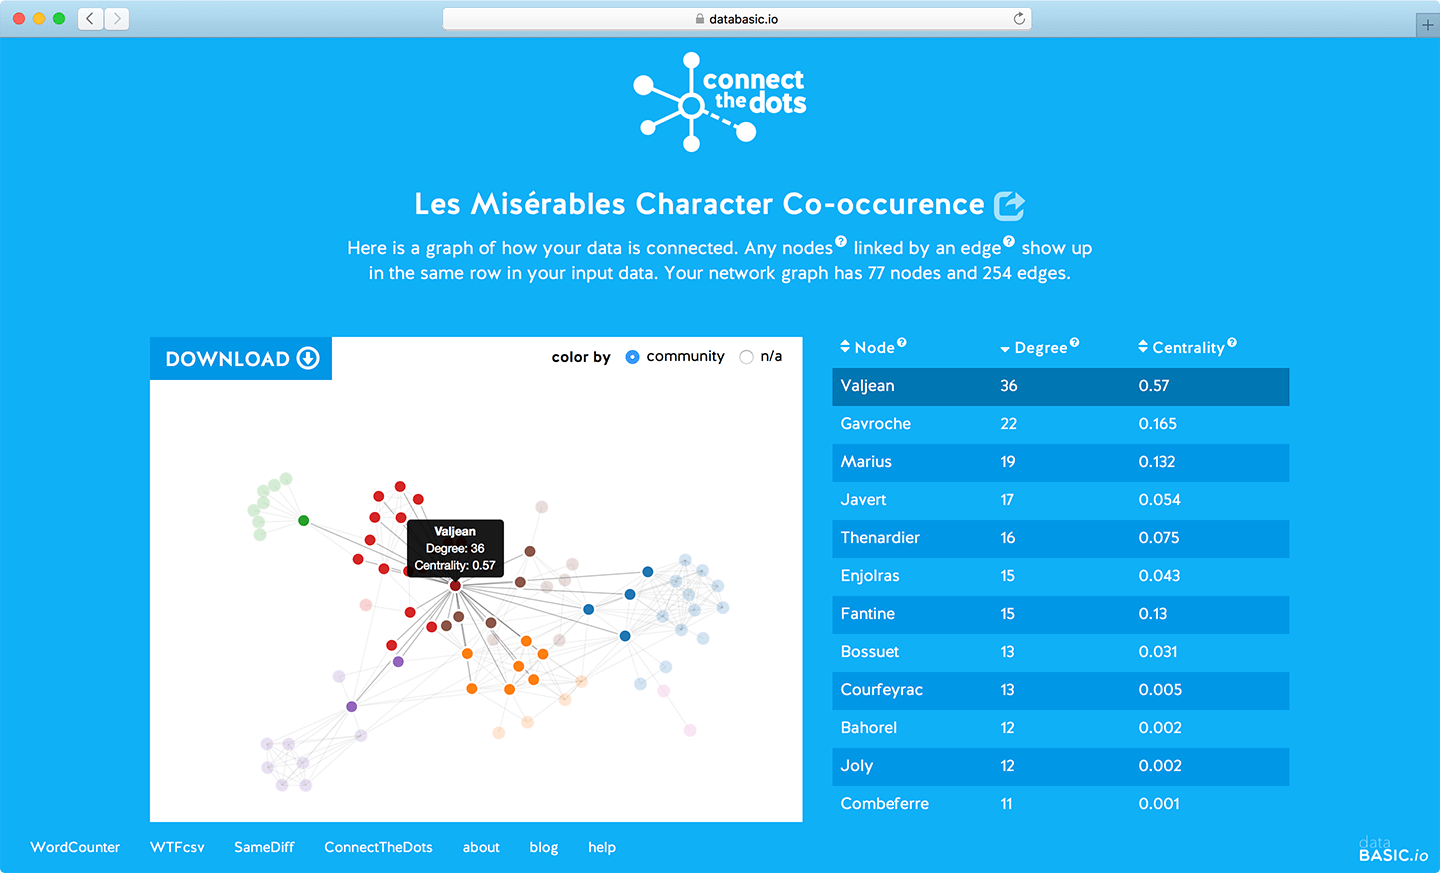 ConnectTheDots shows how data is connected, like this classic network of Les Misérables characters